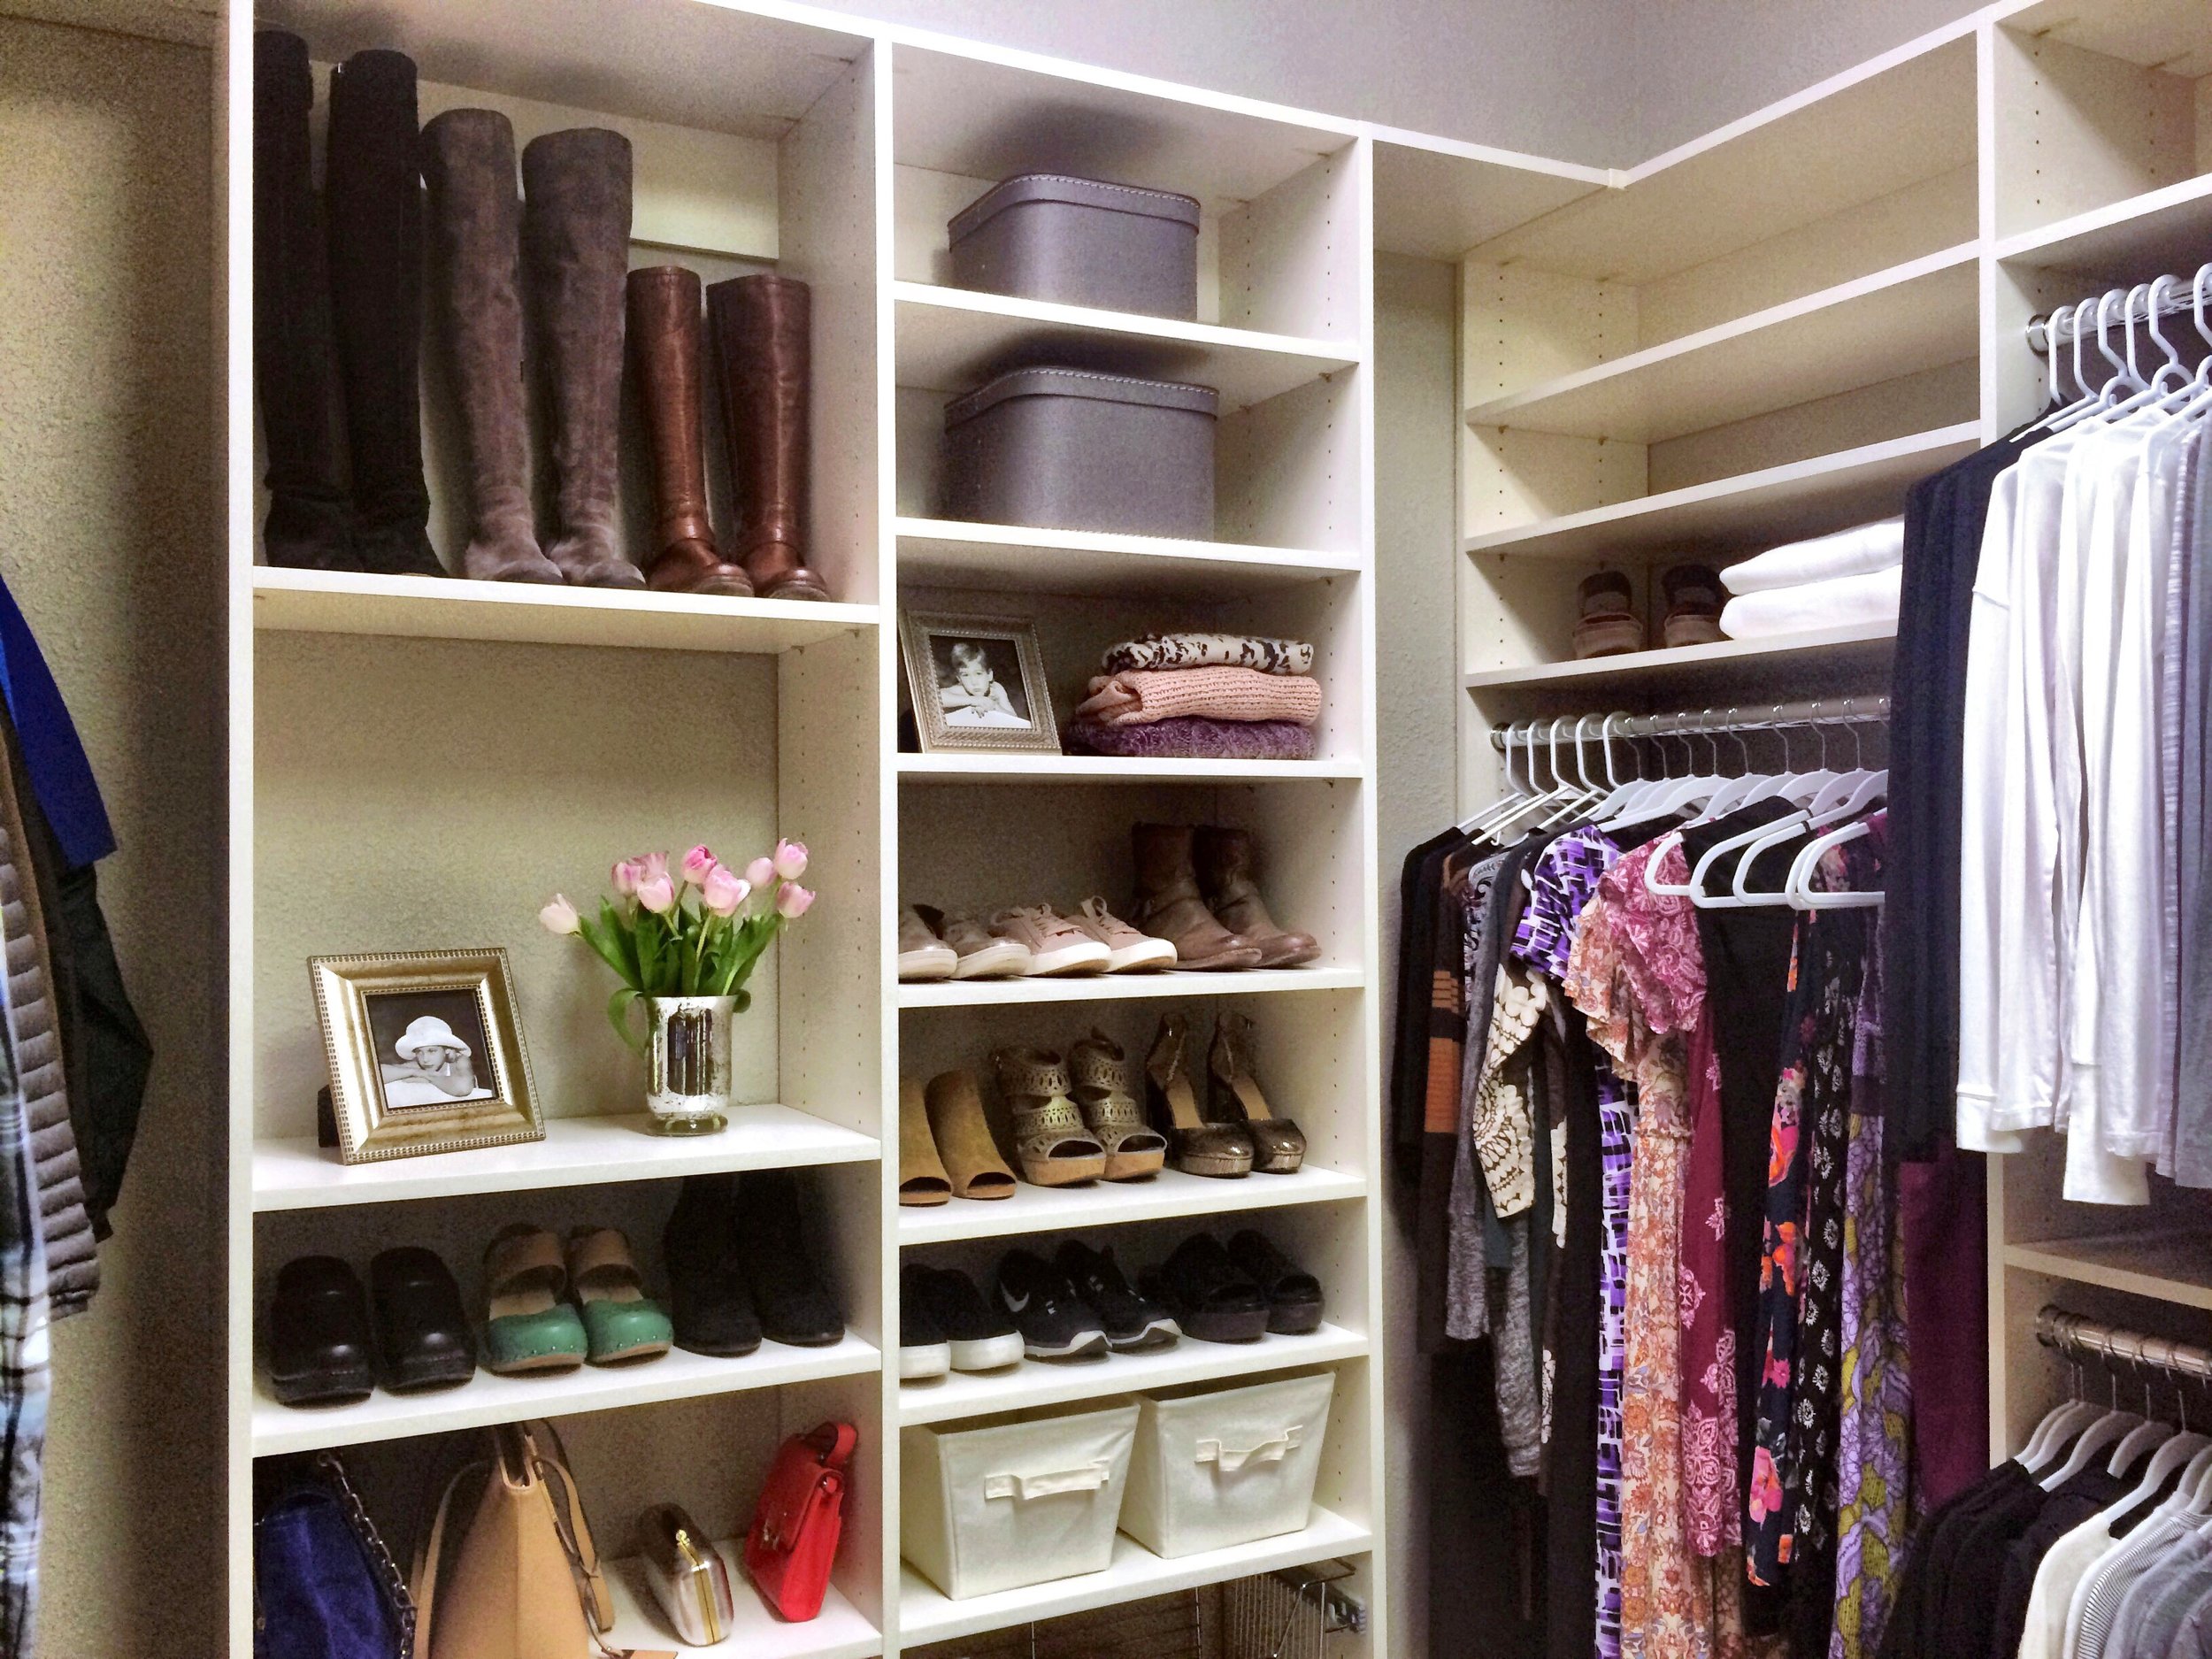 9 Do's and Don'ts Organized Shoe Storage in a Columbus Custom Closet